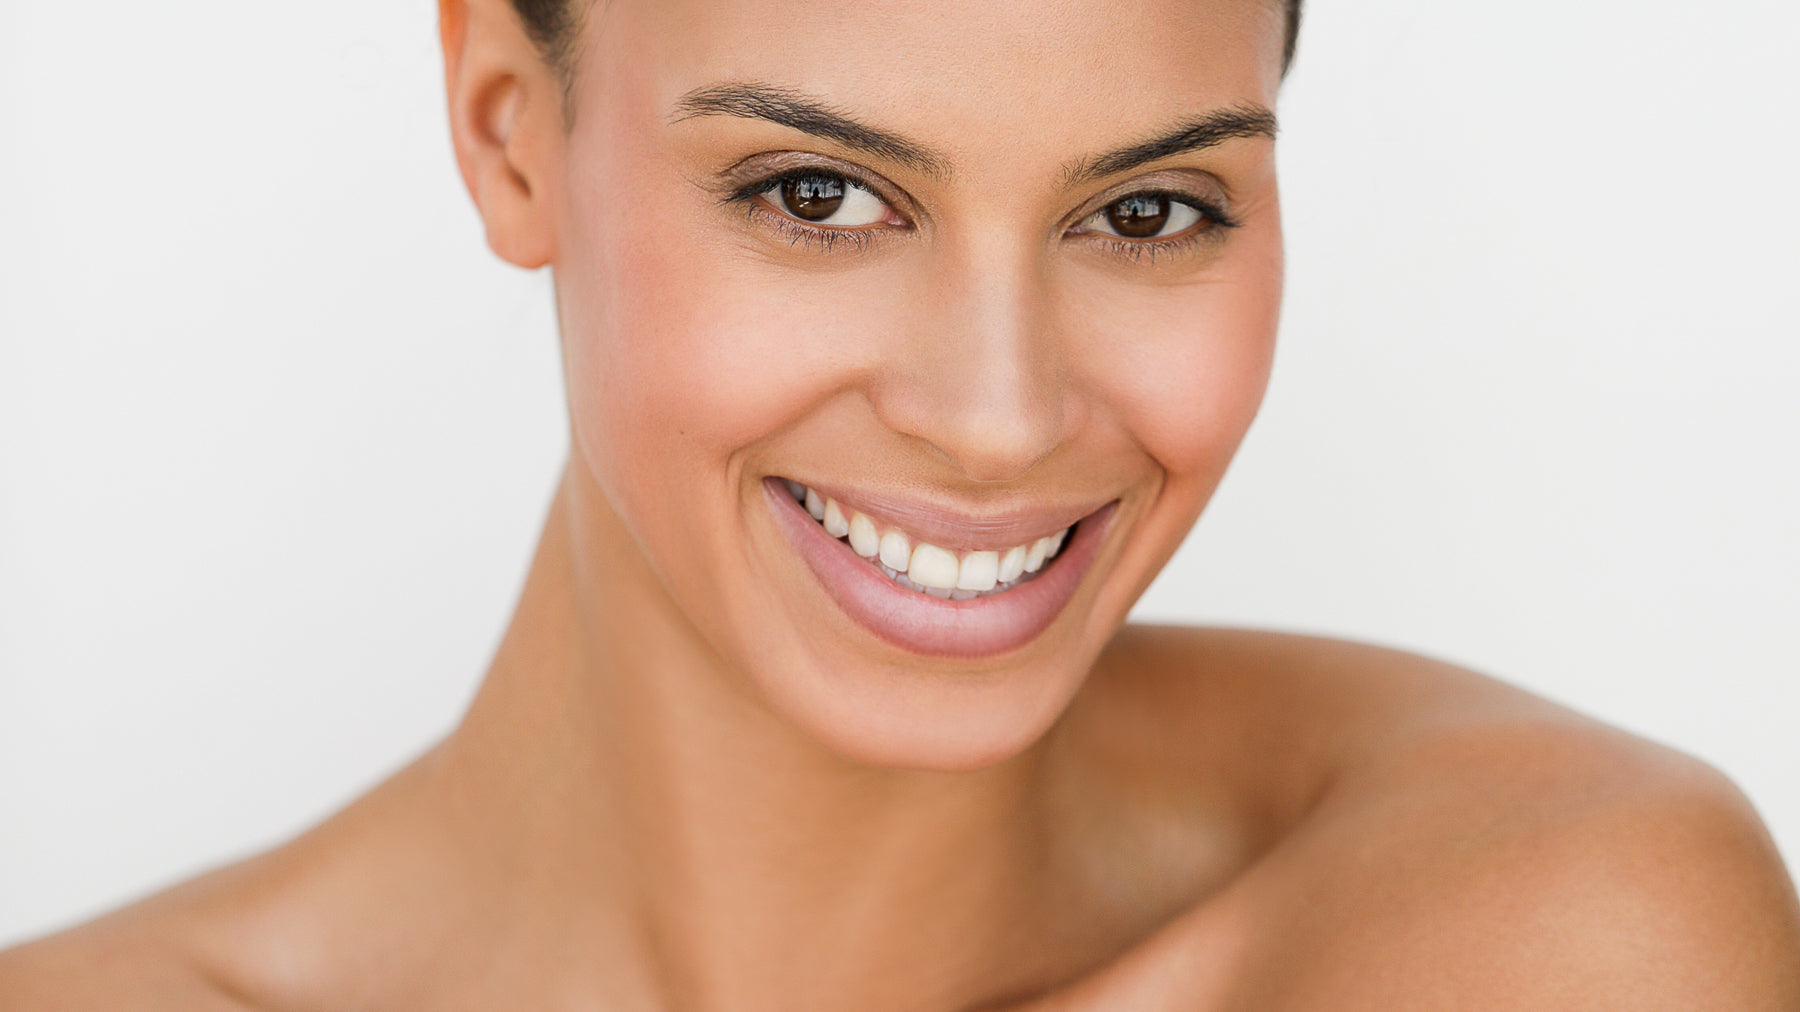 Smiling woman with glowing skin